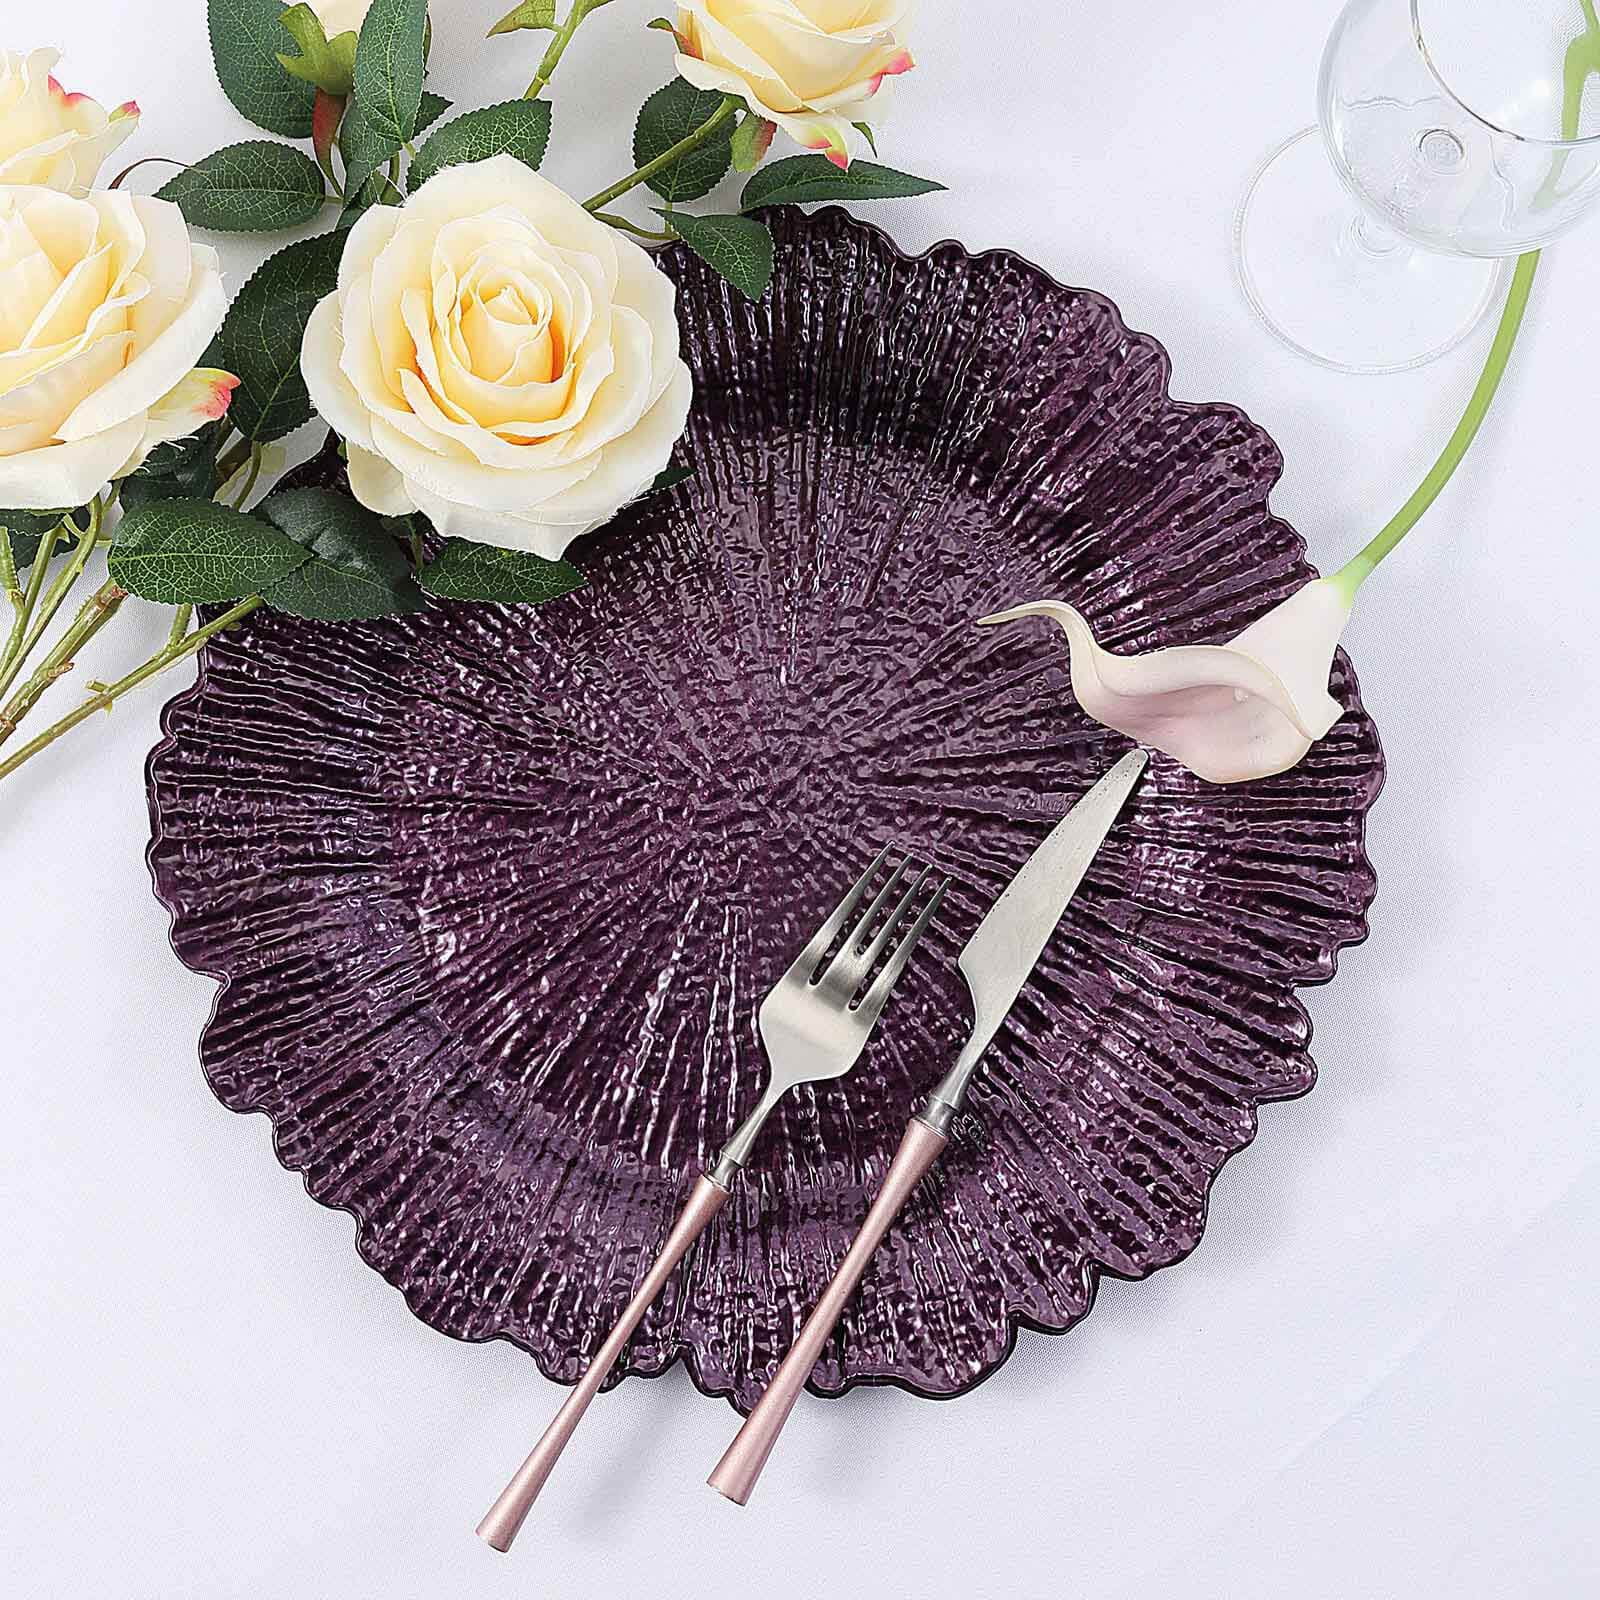 BalsaCircle 6 pcs 13-Inch Burgundy Round Textured Acrylic Charger Plate Dinner Wedding Reception Party Decorations Home